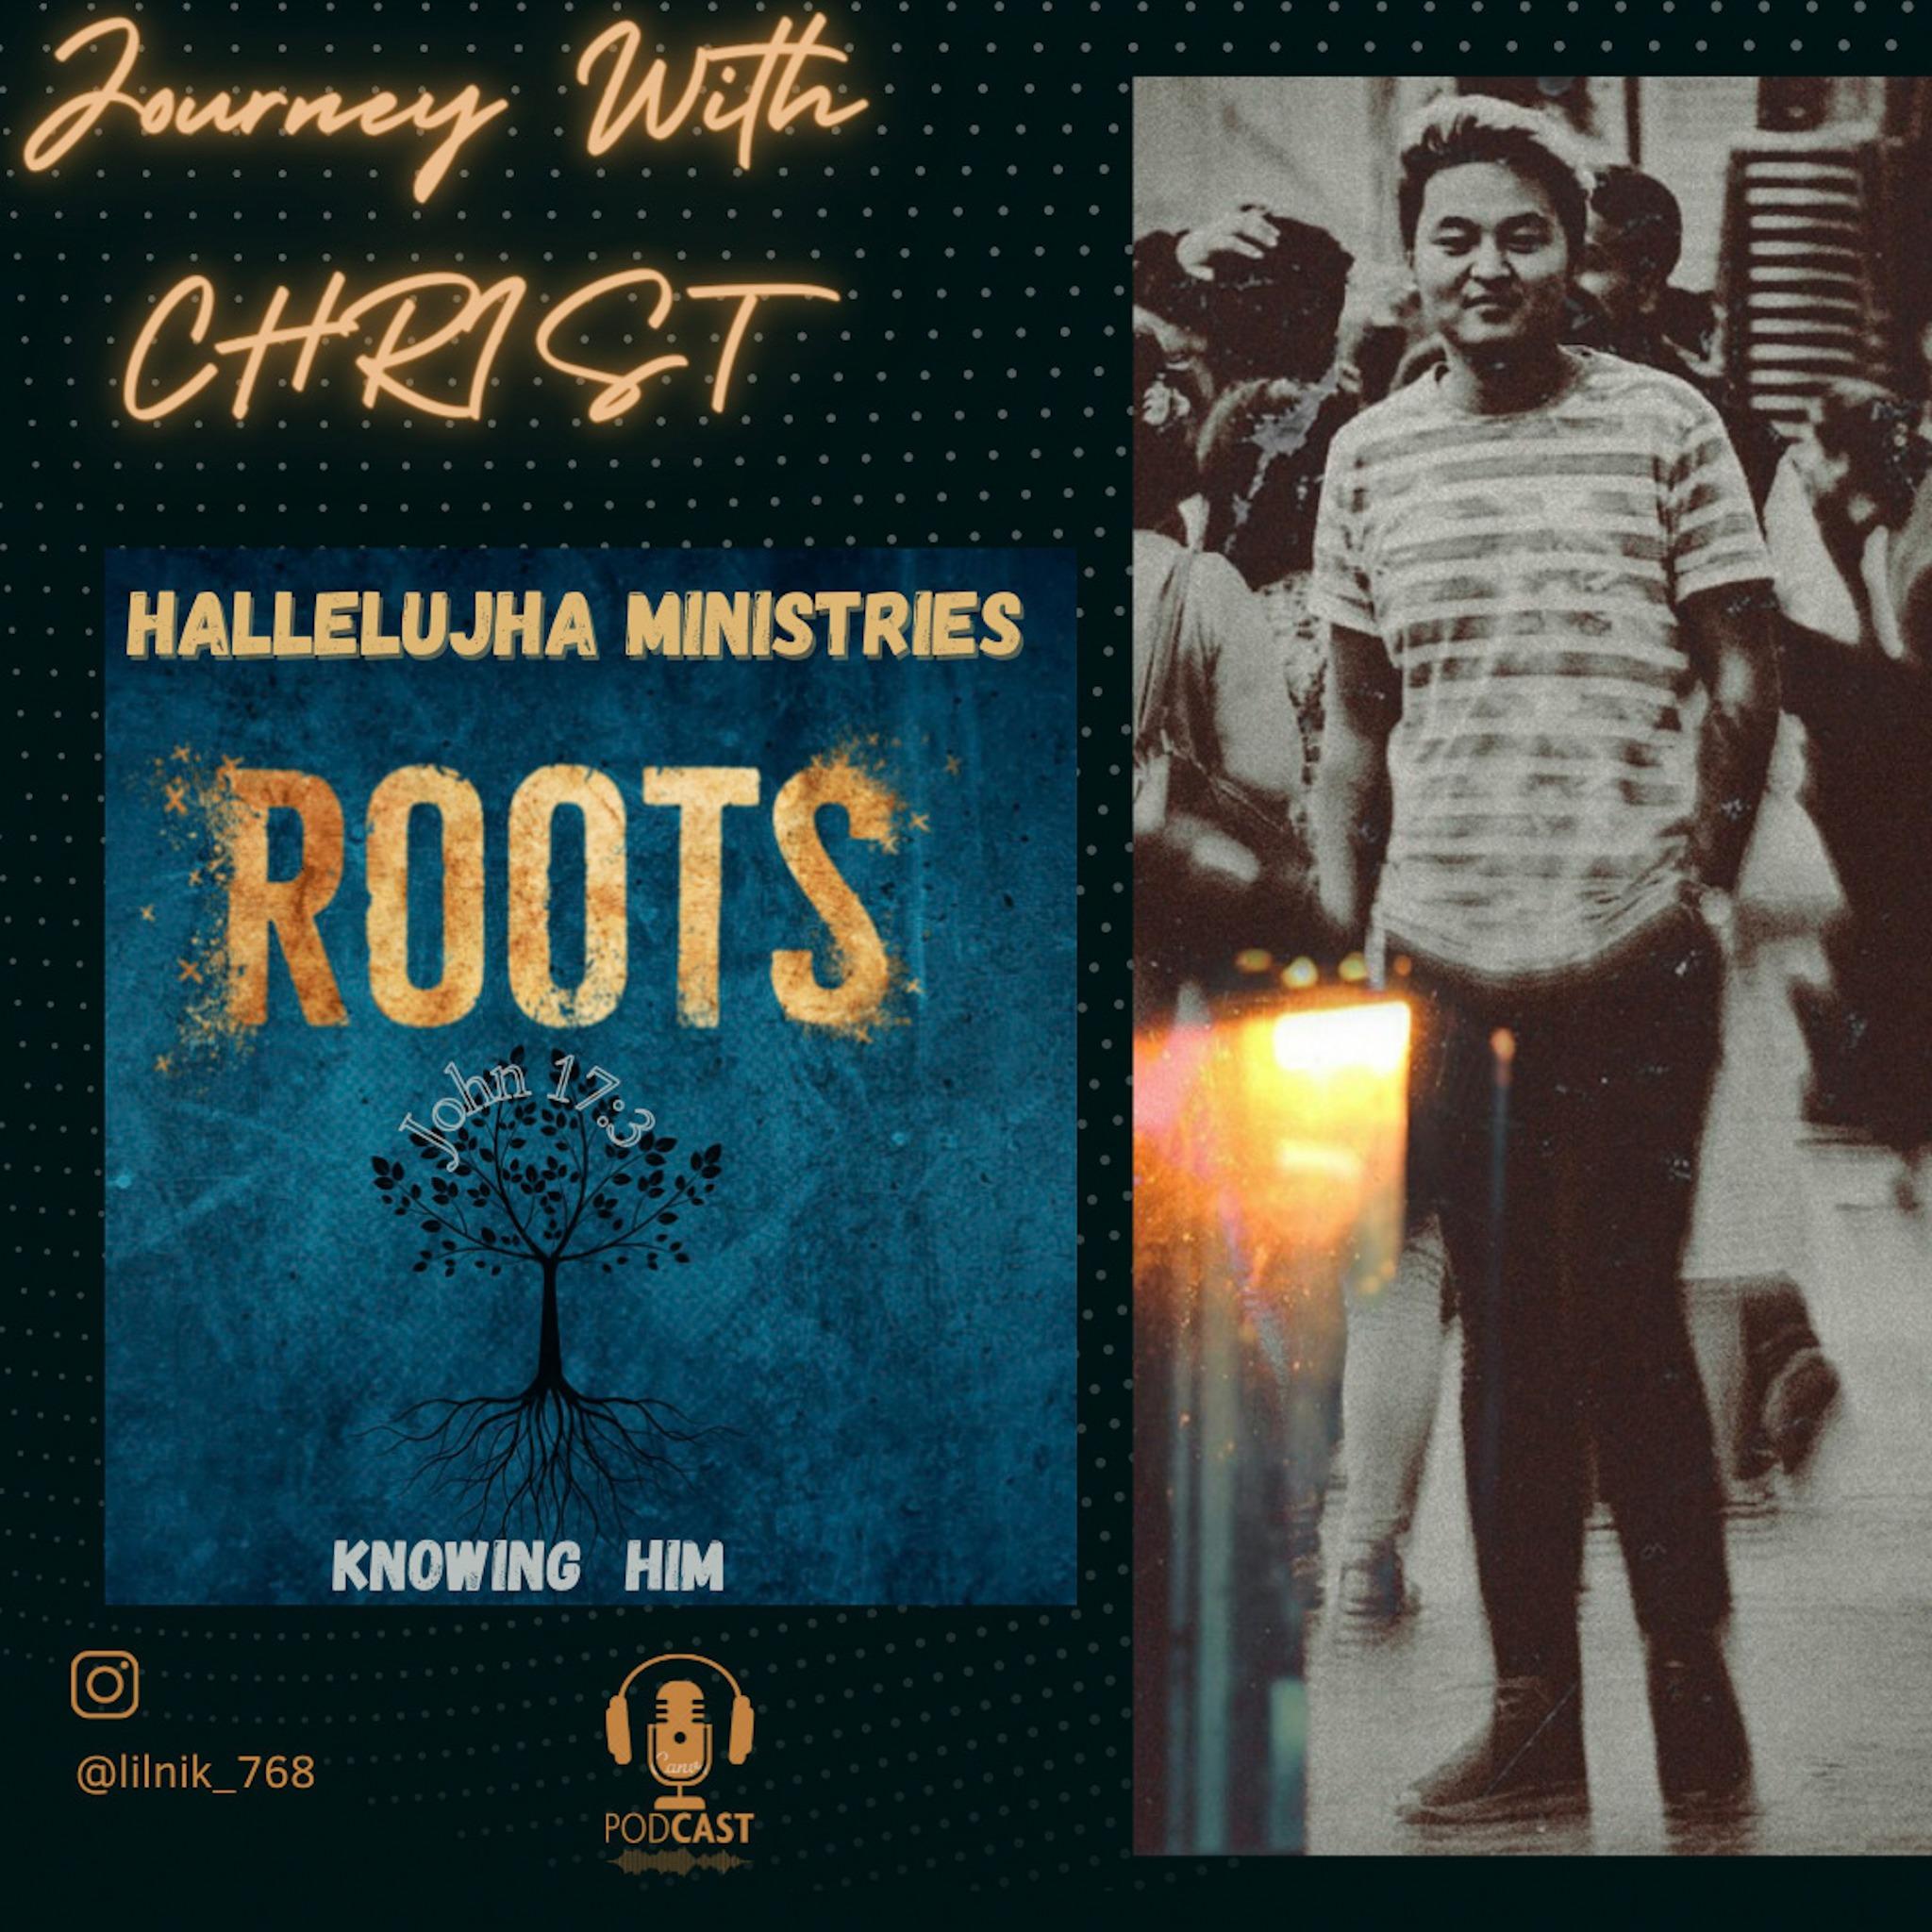 ROOTS (Journey With Christ)